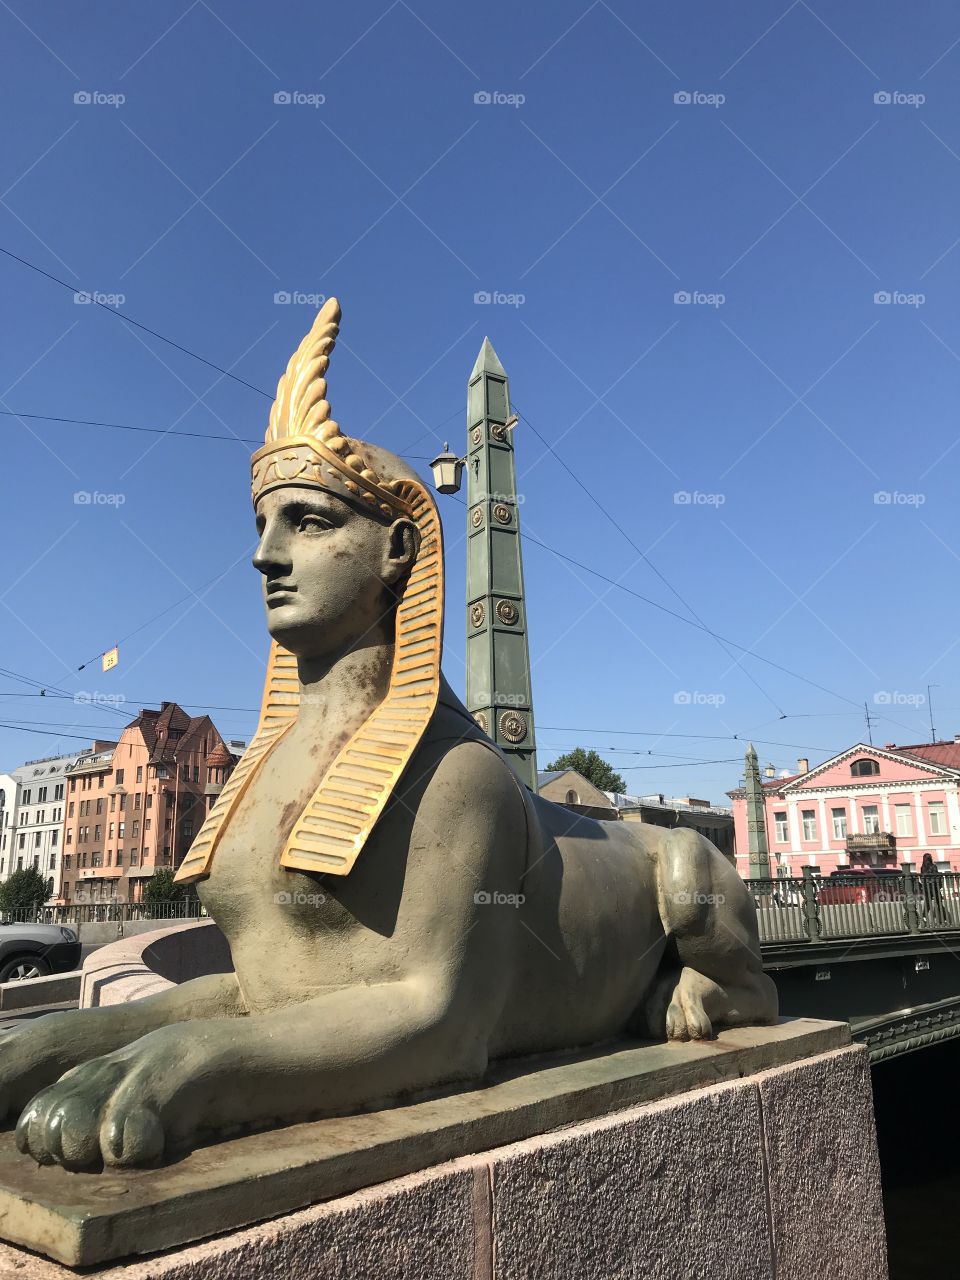 Egyptian Bridge, St. Petersburg, Russia    Egyptian Bridge - a bridge across the Fontanka River in the Admiralteysky District of St. Petersburg, connects Pokrovsky and Nameless Islands. The bridge is a monument of history and culture. 🇷🇺